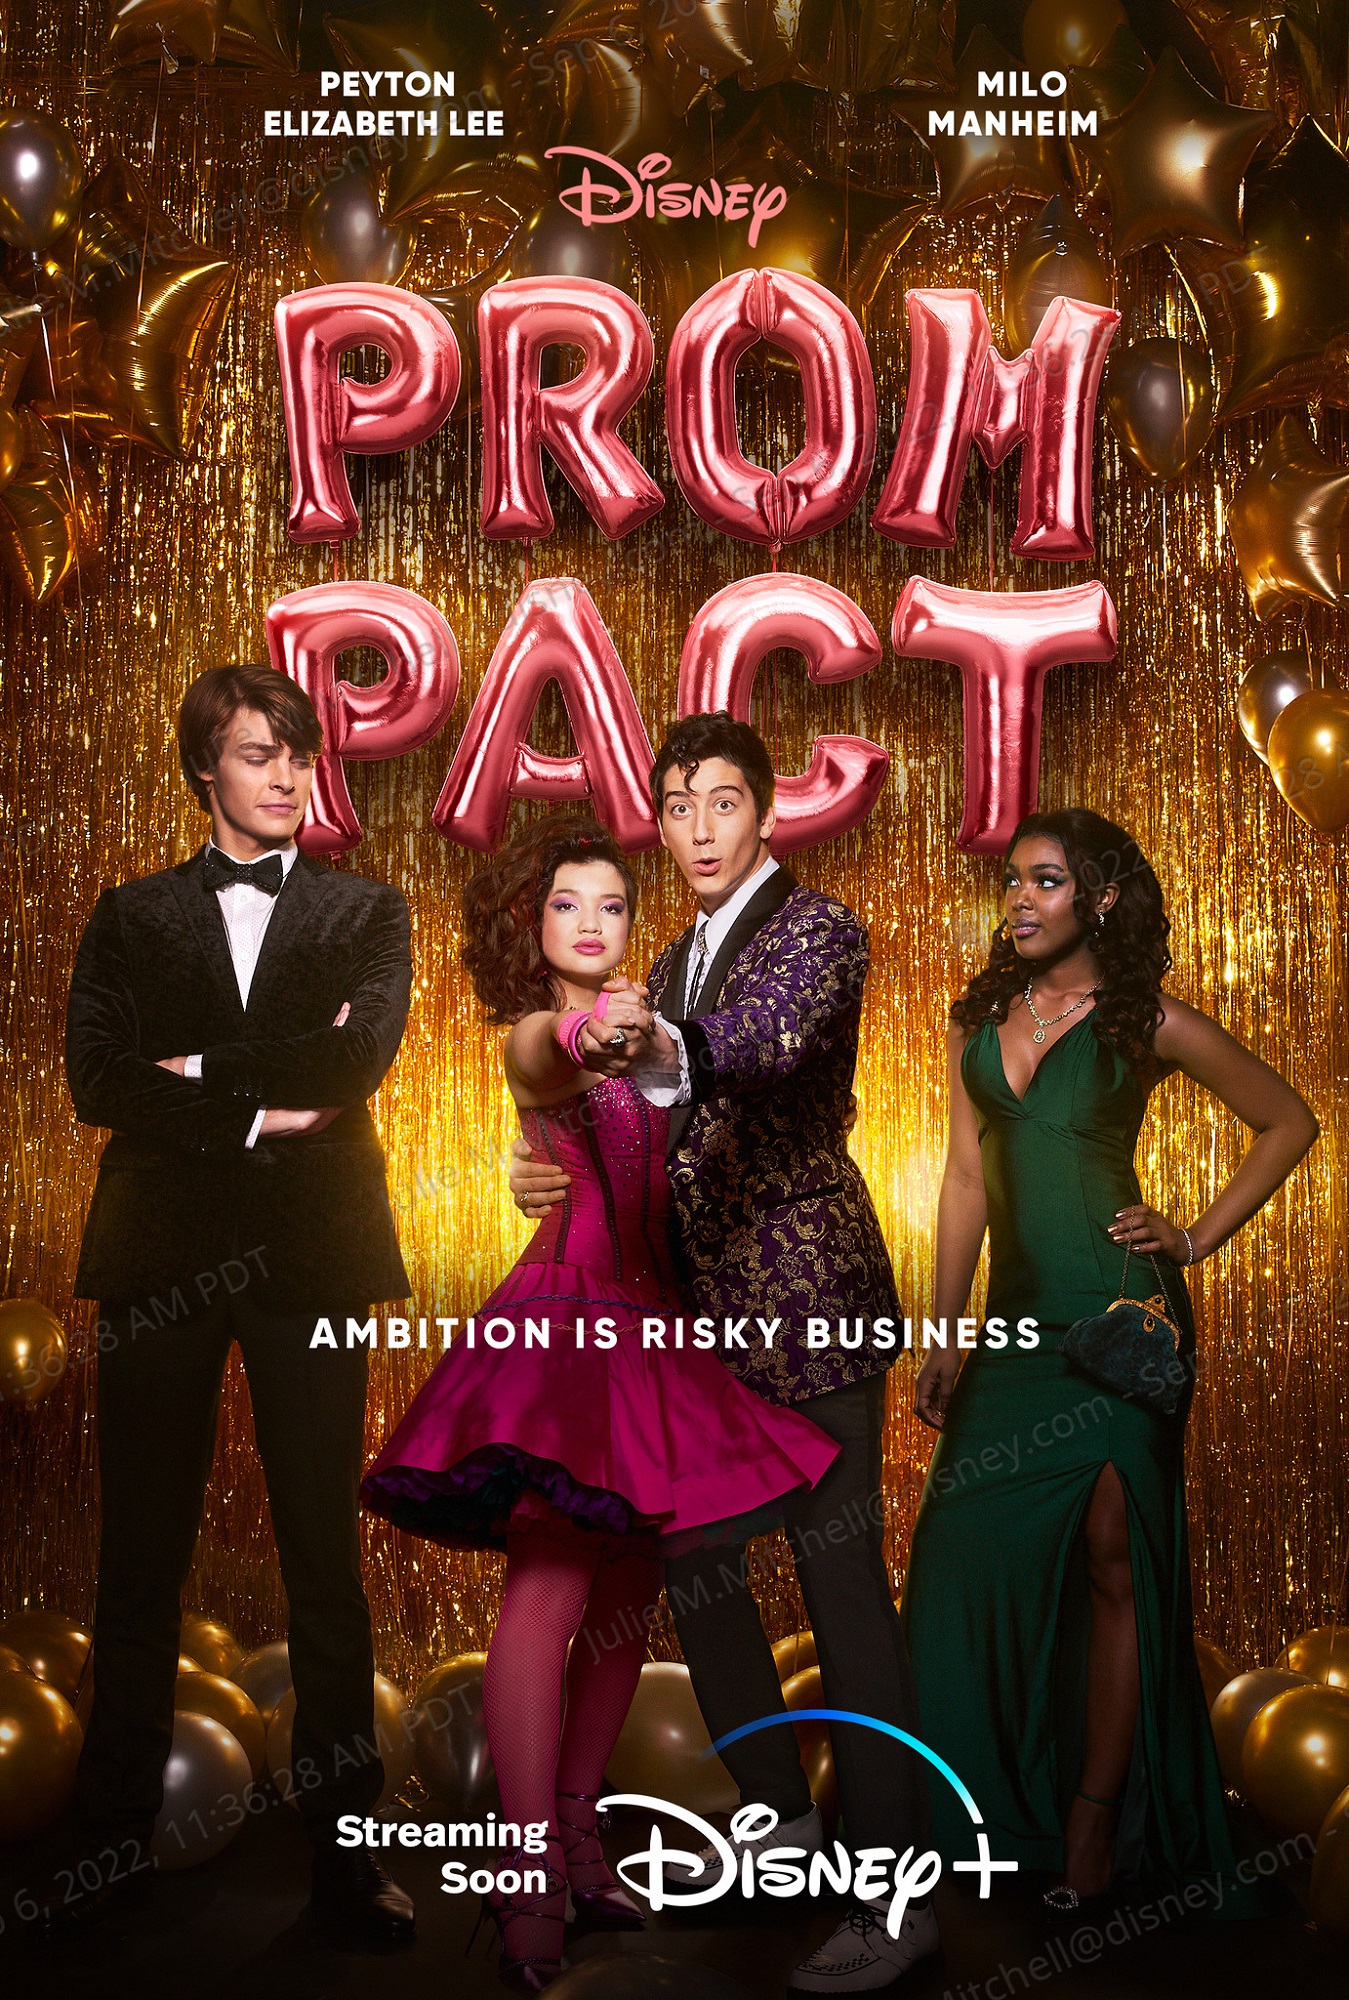 Peyton Elizabeth Lee & Milo Manheim Take Over The D23 Expo To Unveil New  Image From Prom Pact – BeautifulBallad